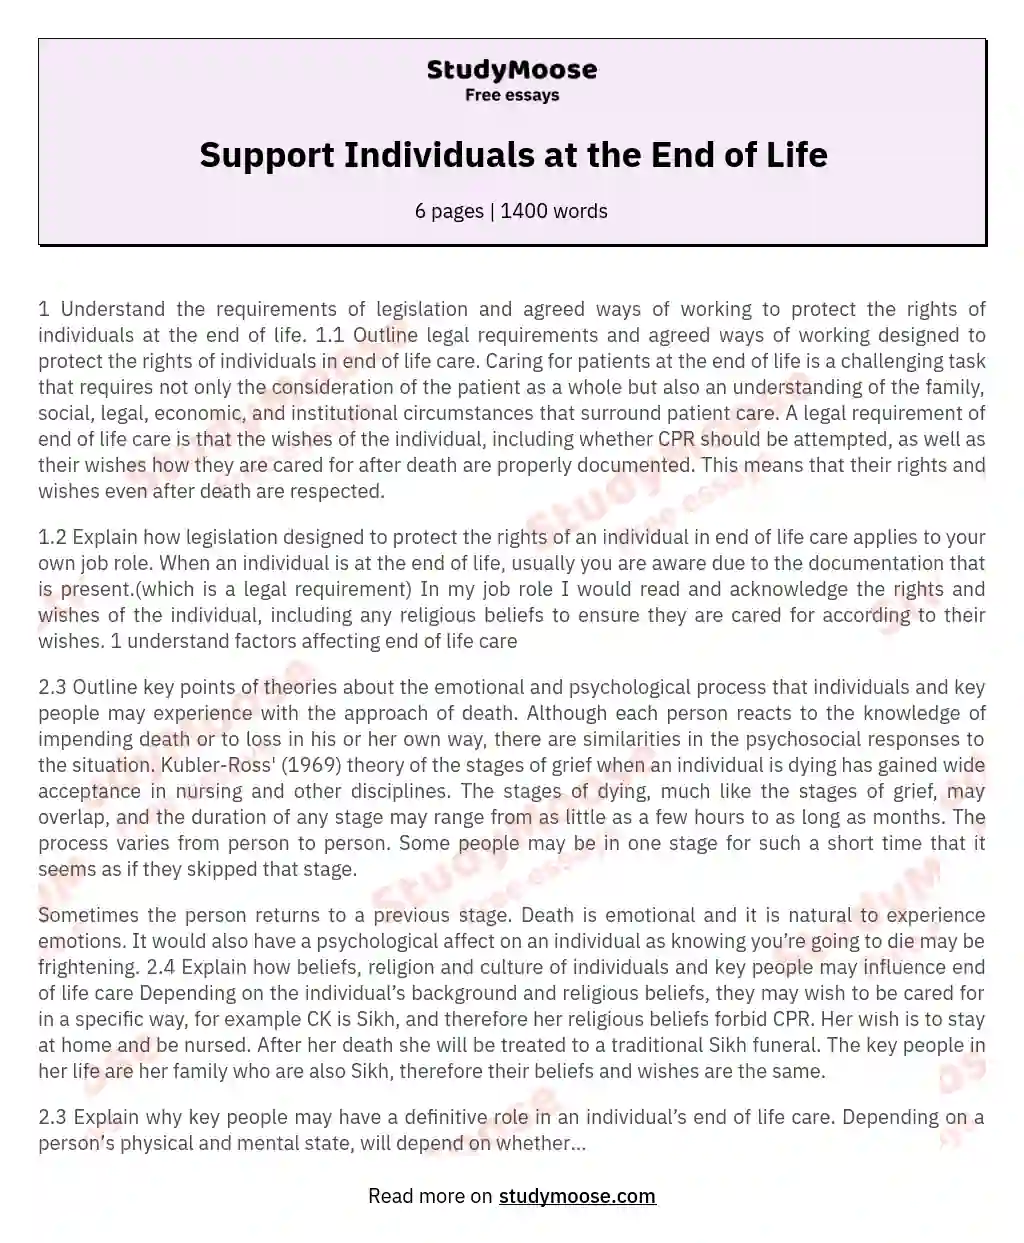 Support Individuals at the End of Life essay